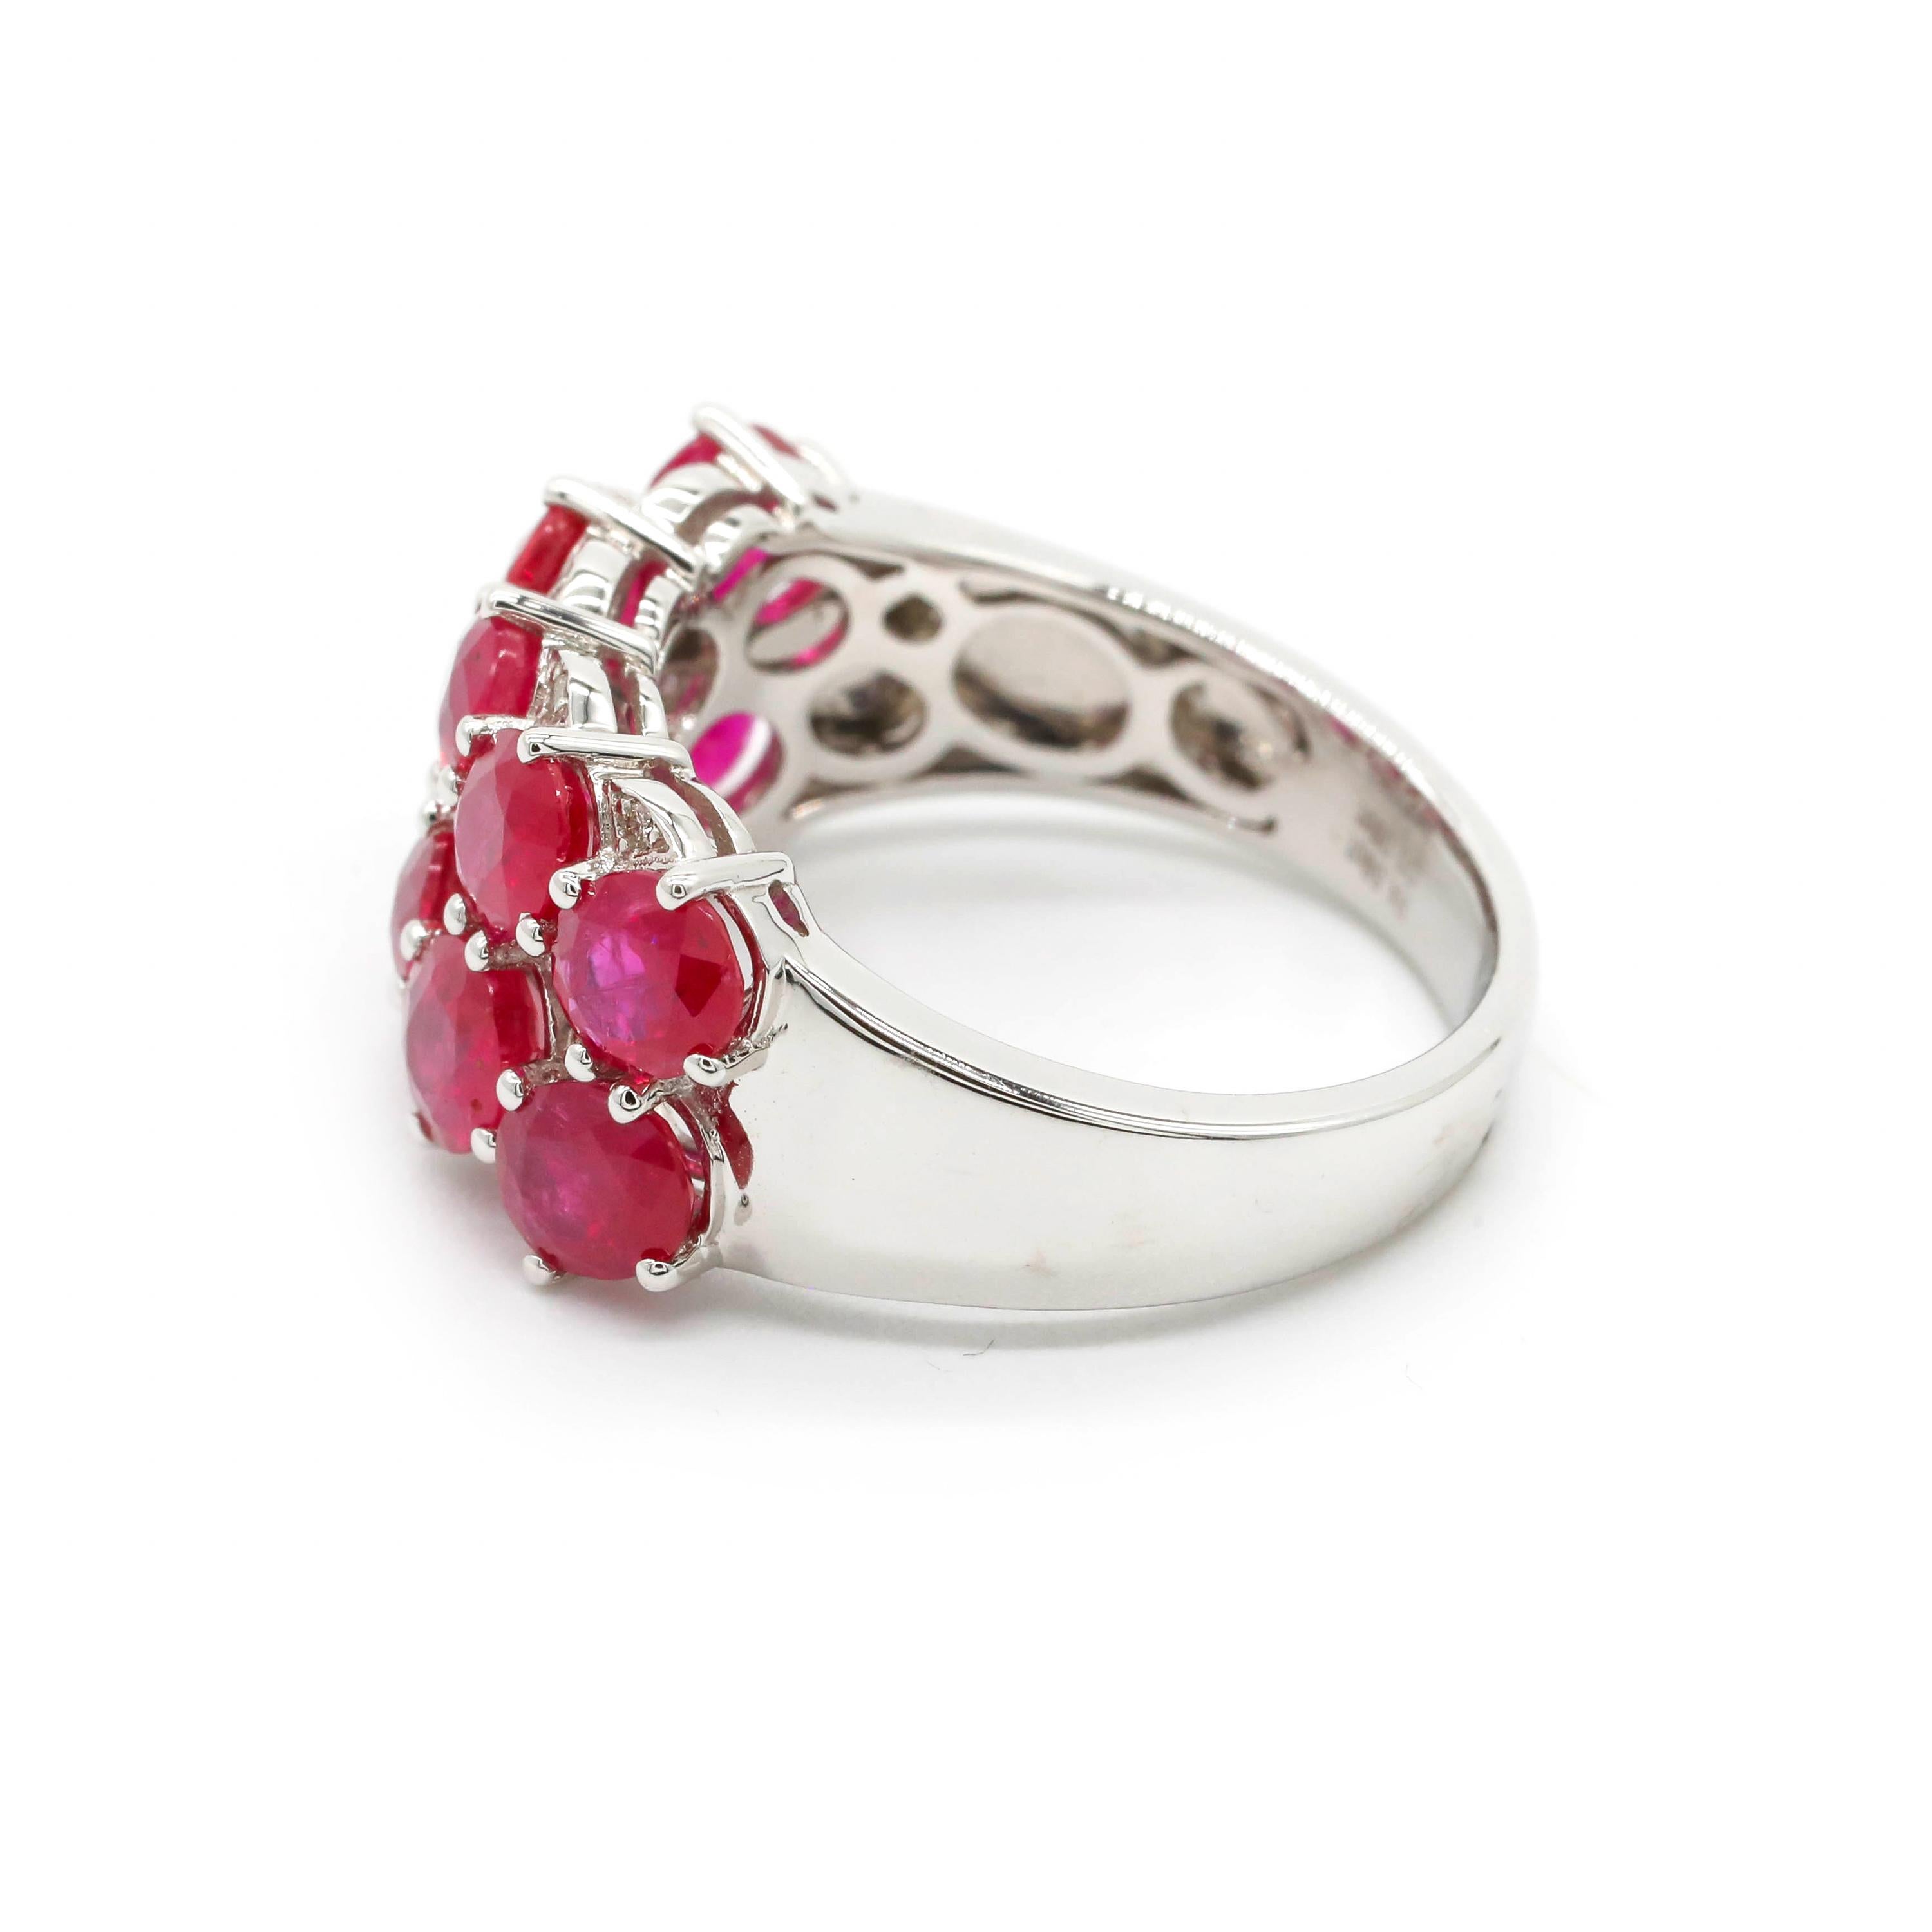 4.68 Carat Oval Cut Ruby and 0.08 Ct Round Diamond 18k White Gold Cluster Ring

This modern ring features a total of 4.68 Carat Ruby Gemstone 0.08 carats of diamond round shape Set in 18K White Gold.

We guarantee all products sold and our number